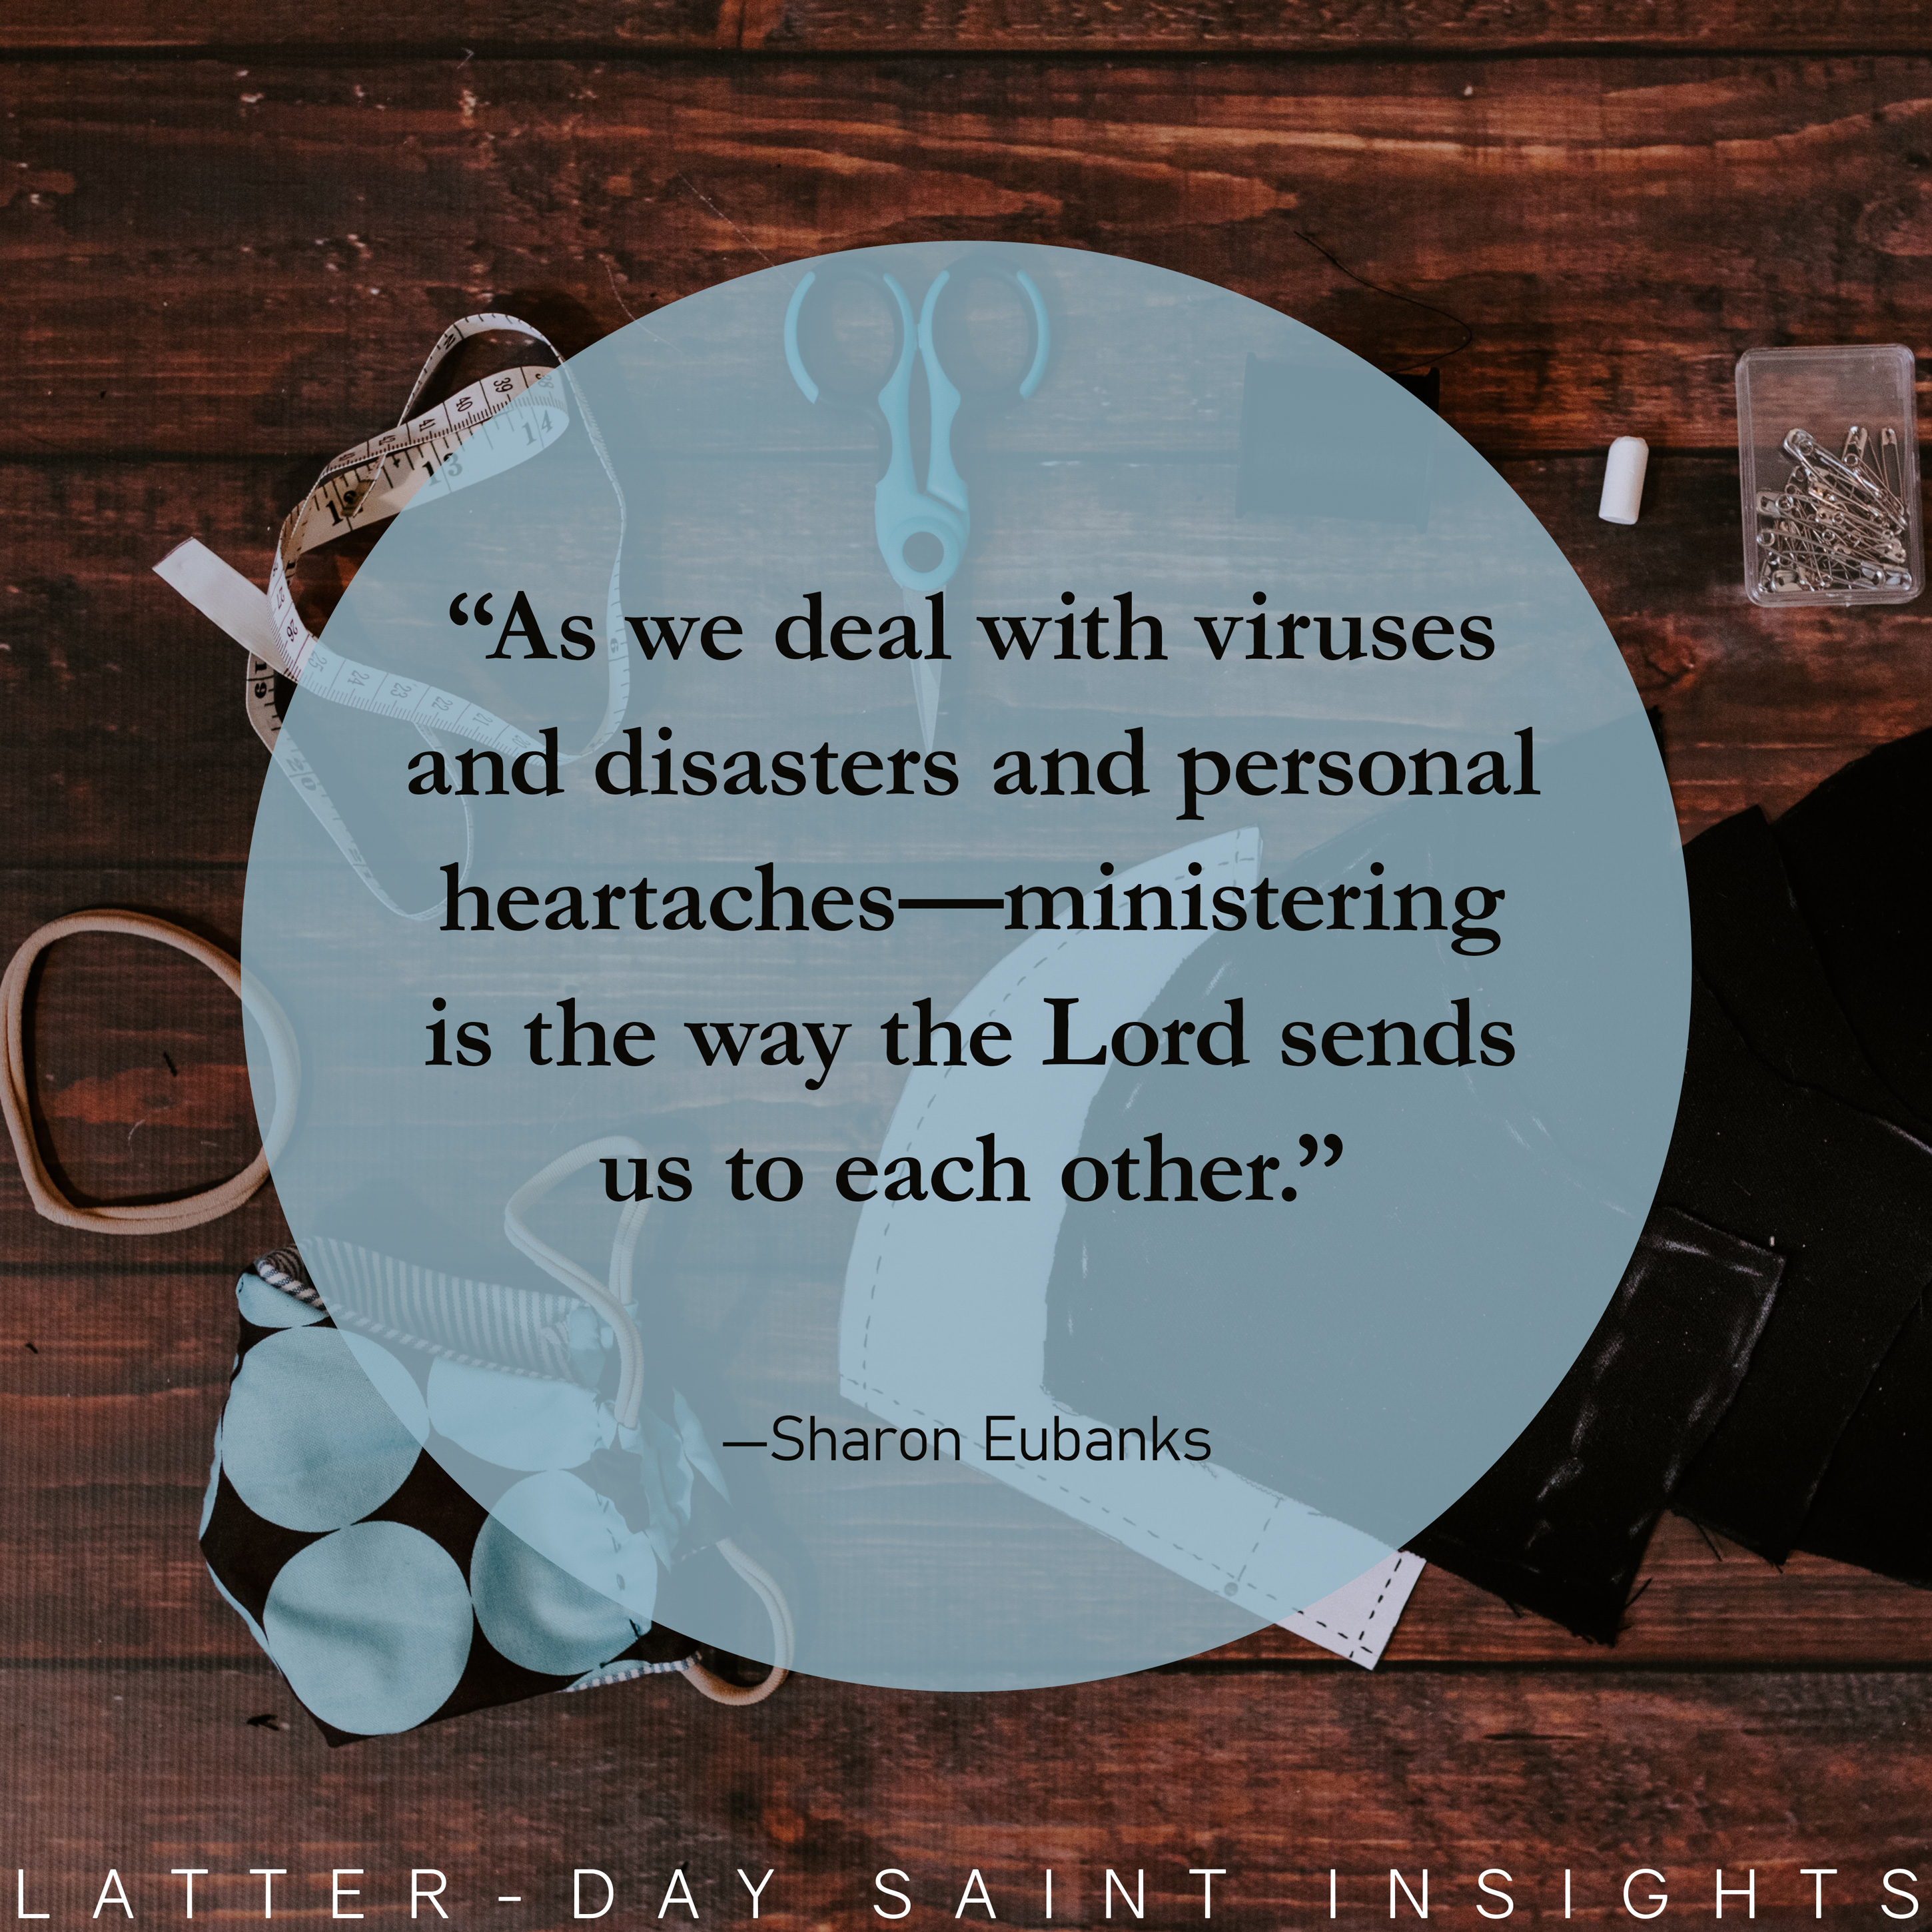 A quote by Sharon Eubank that says, "As we deal with viruses and disasters and personal heartaches—ministering is the way the Lord sends us to each other."